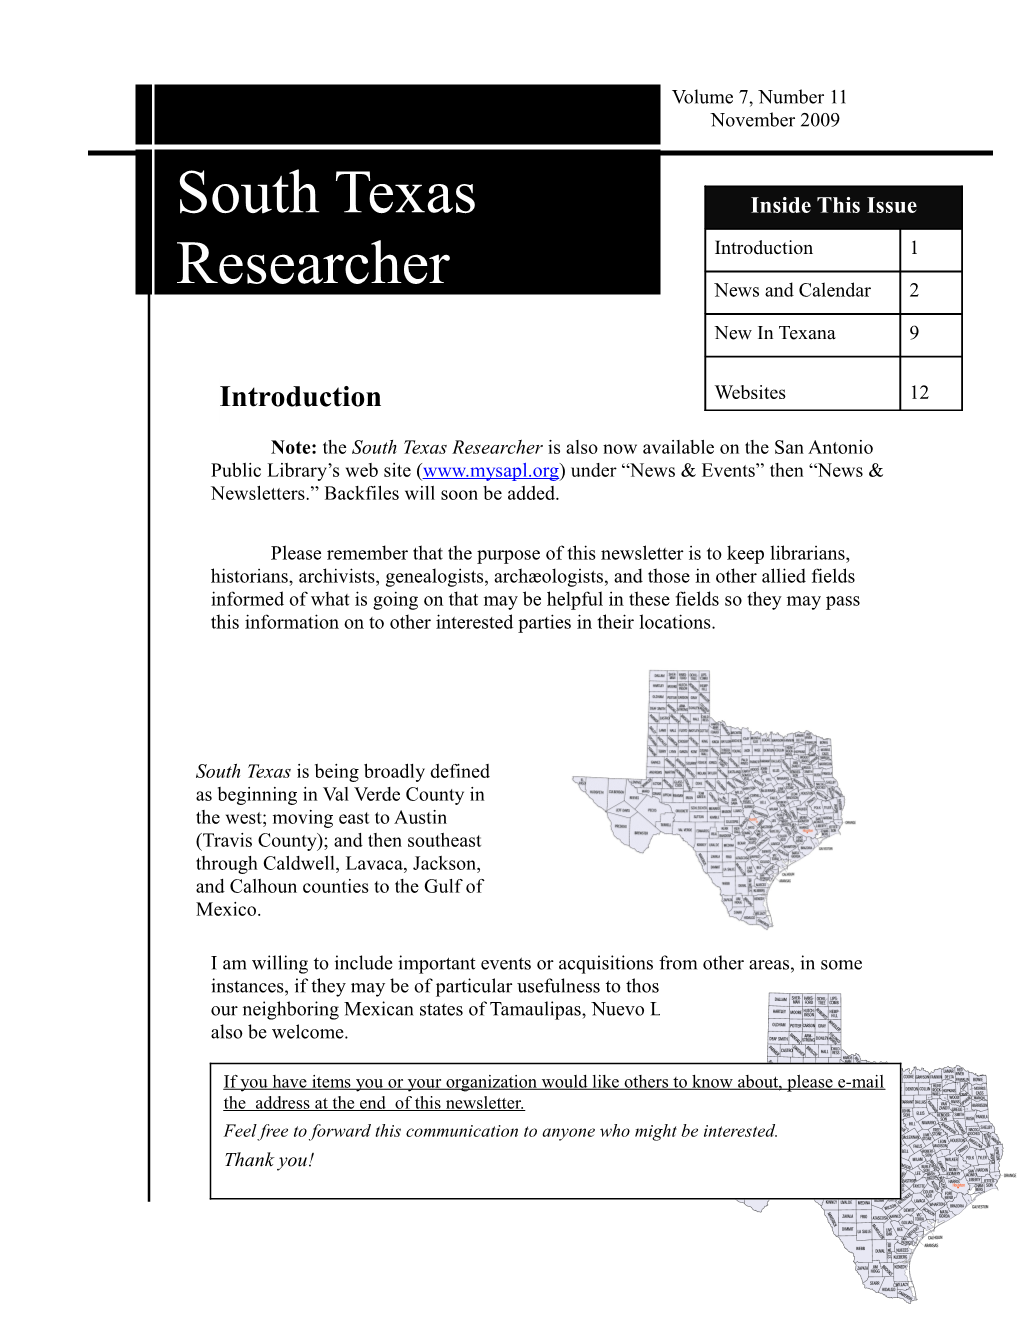 Note: the South Texas Researcher Is Also Now Available on the San Antonio Public Library